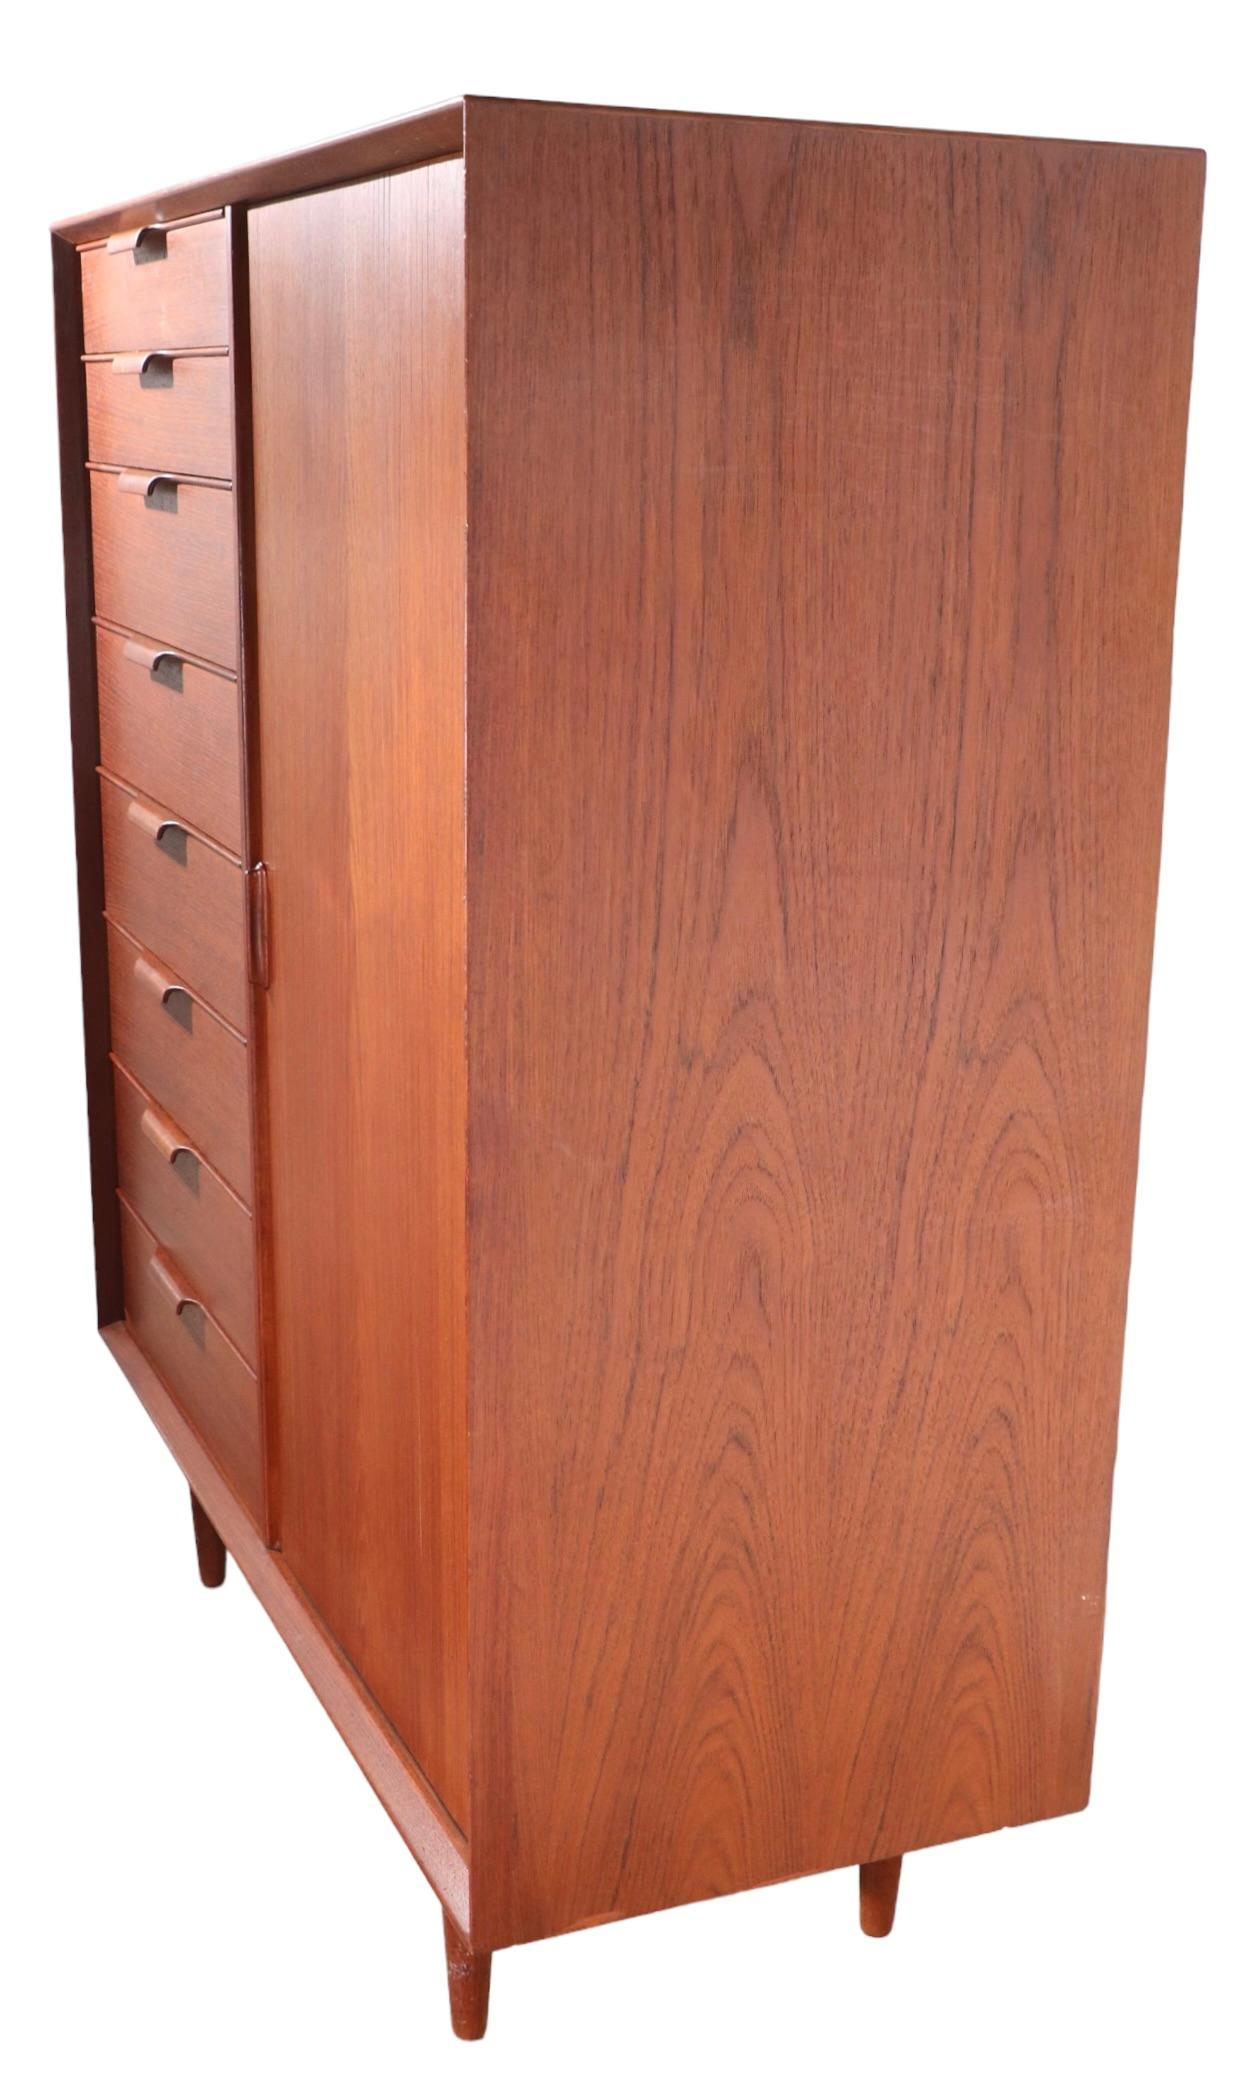 Stylish Danish Modern wardrobe made in Denmark by Falster Mobelfabrik. The chifferobe features a divided. cabinet with a bank of five drawers, flanked but a tambour roll door, that opens to an open closet to hang shirts, coats etc. This example is